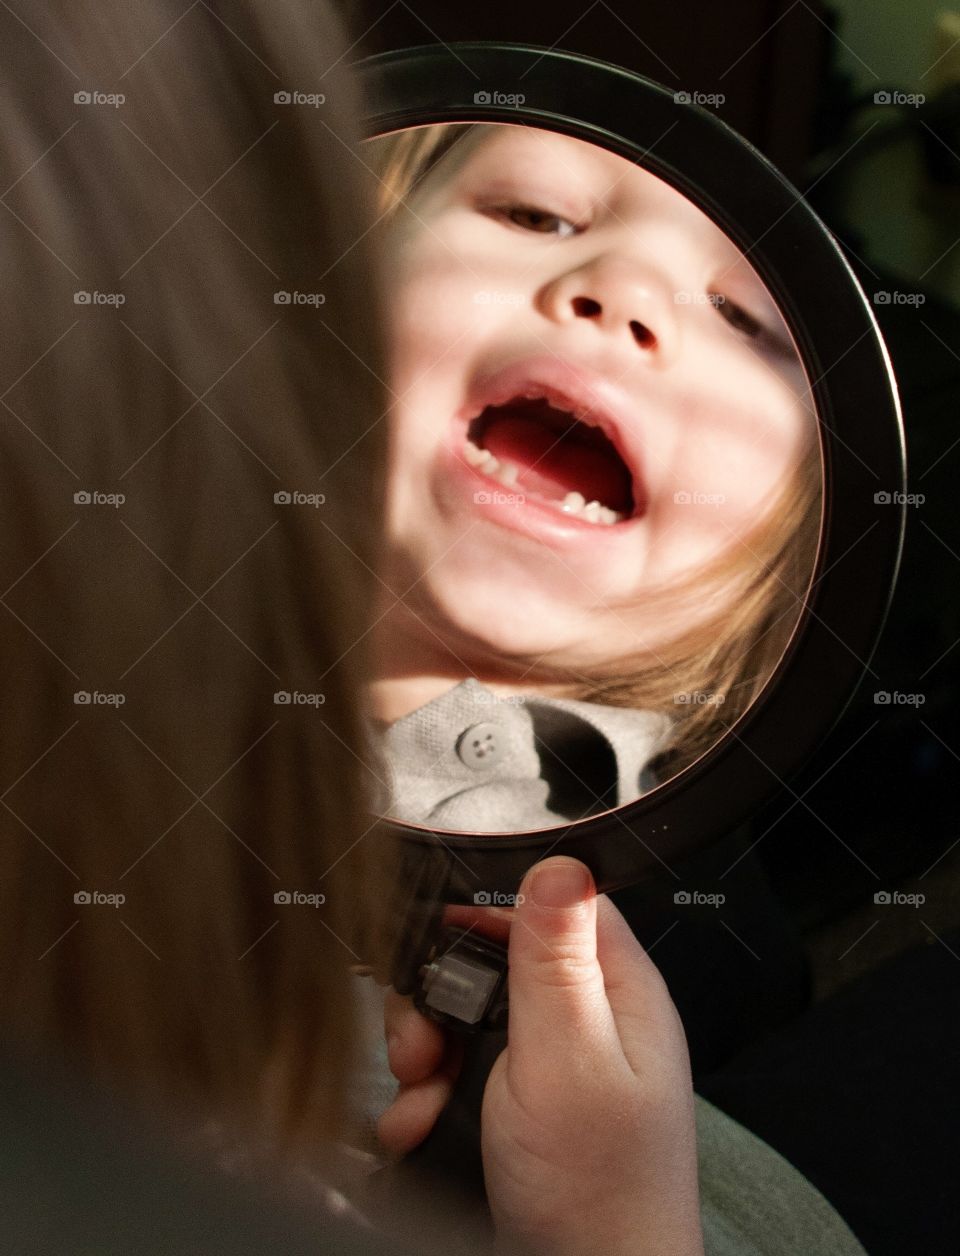 Little girl looking at her missing front teeth in a hand held mirror